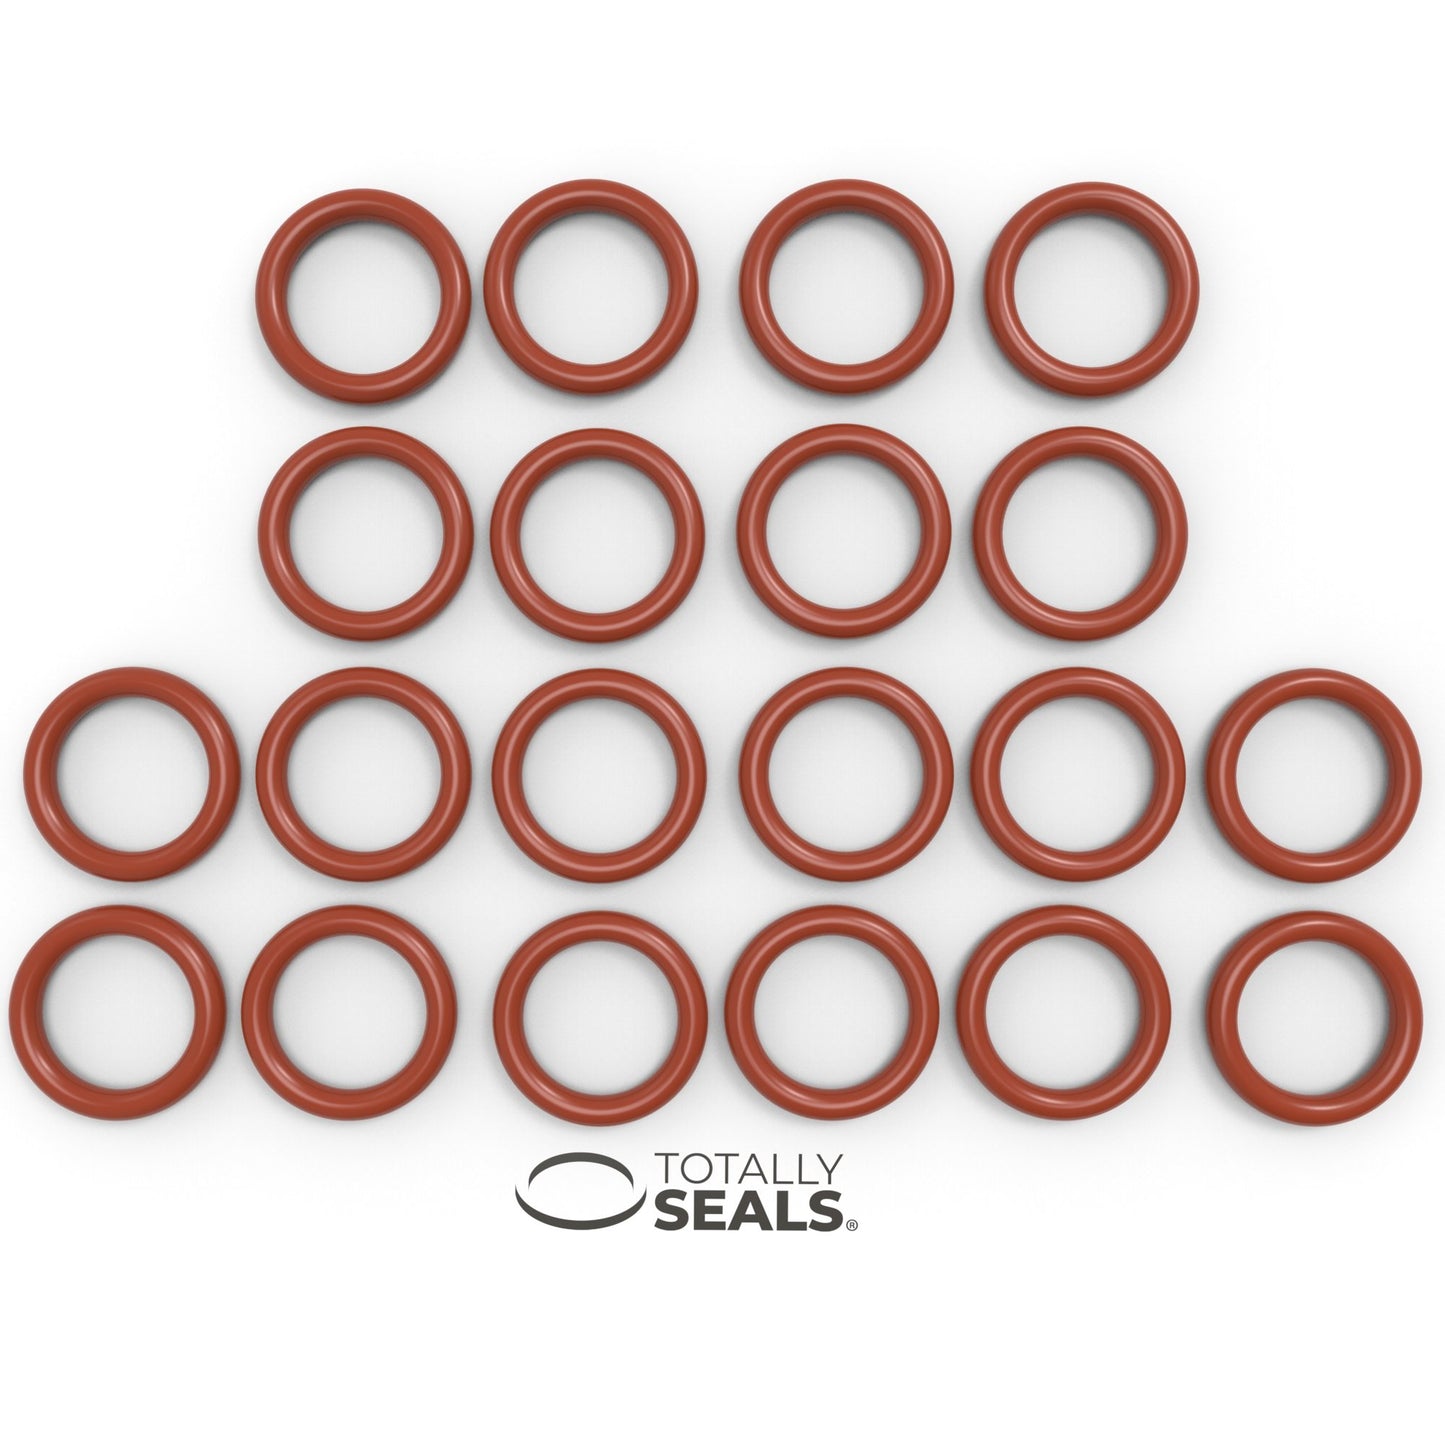 7mm x 3mm (13mm OD) Silicone O-Rings - Totally Seals®